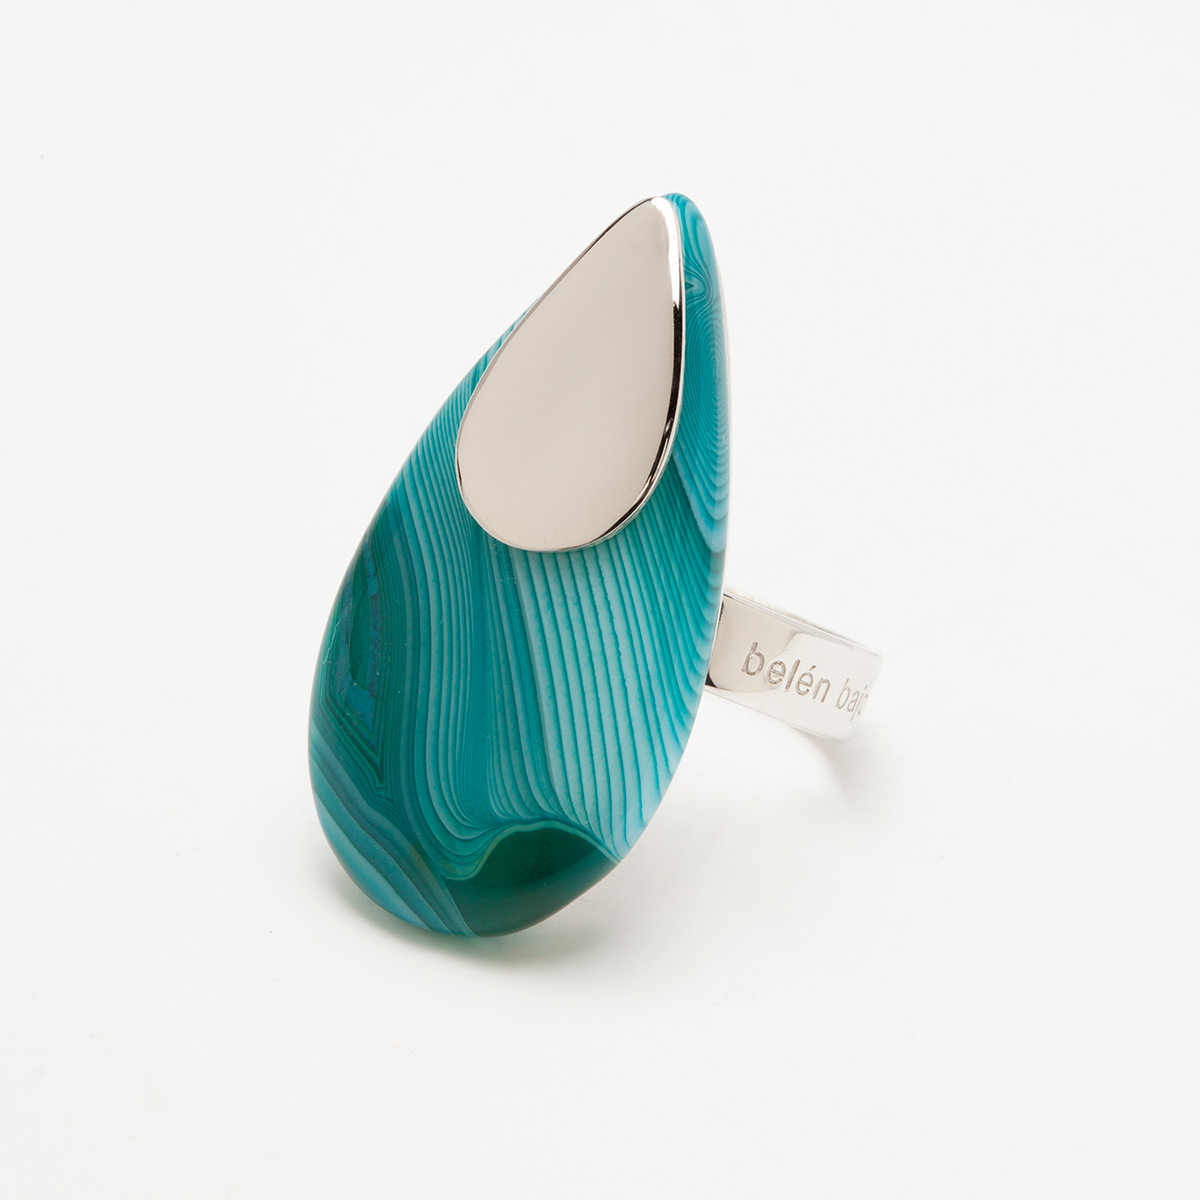 Adi handmade sterling silver and green banded agate ring 1 designed by Belen Bajo